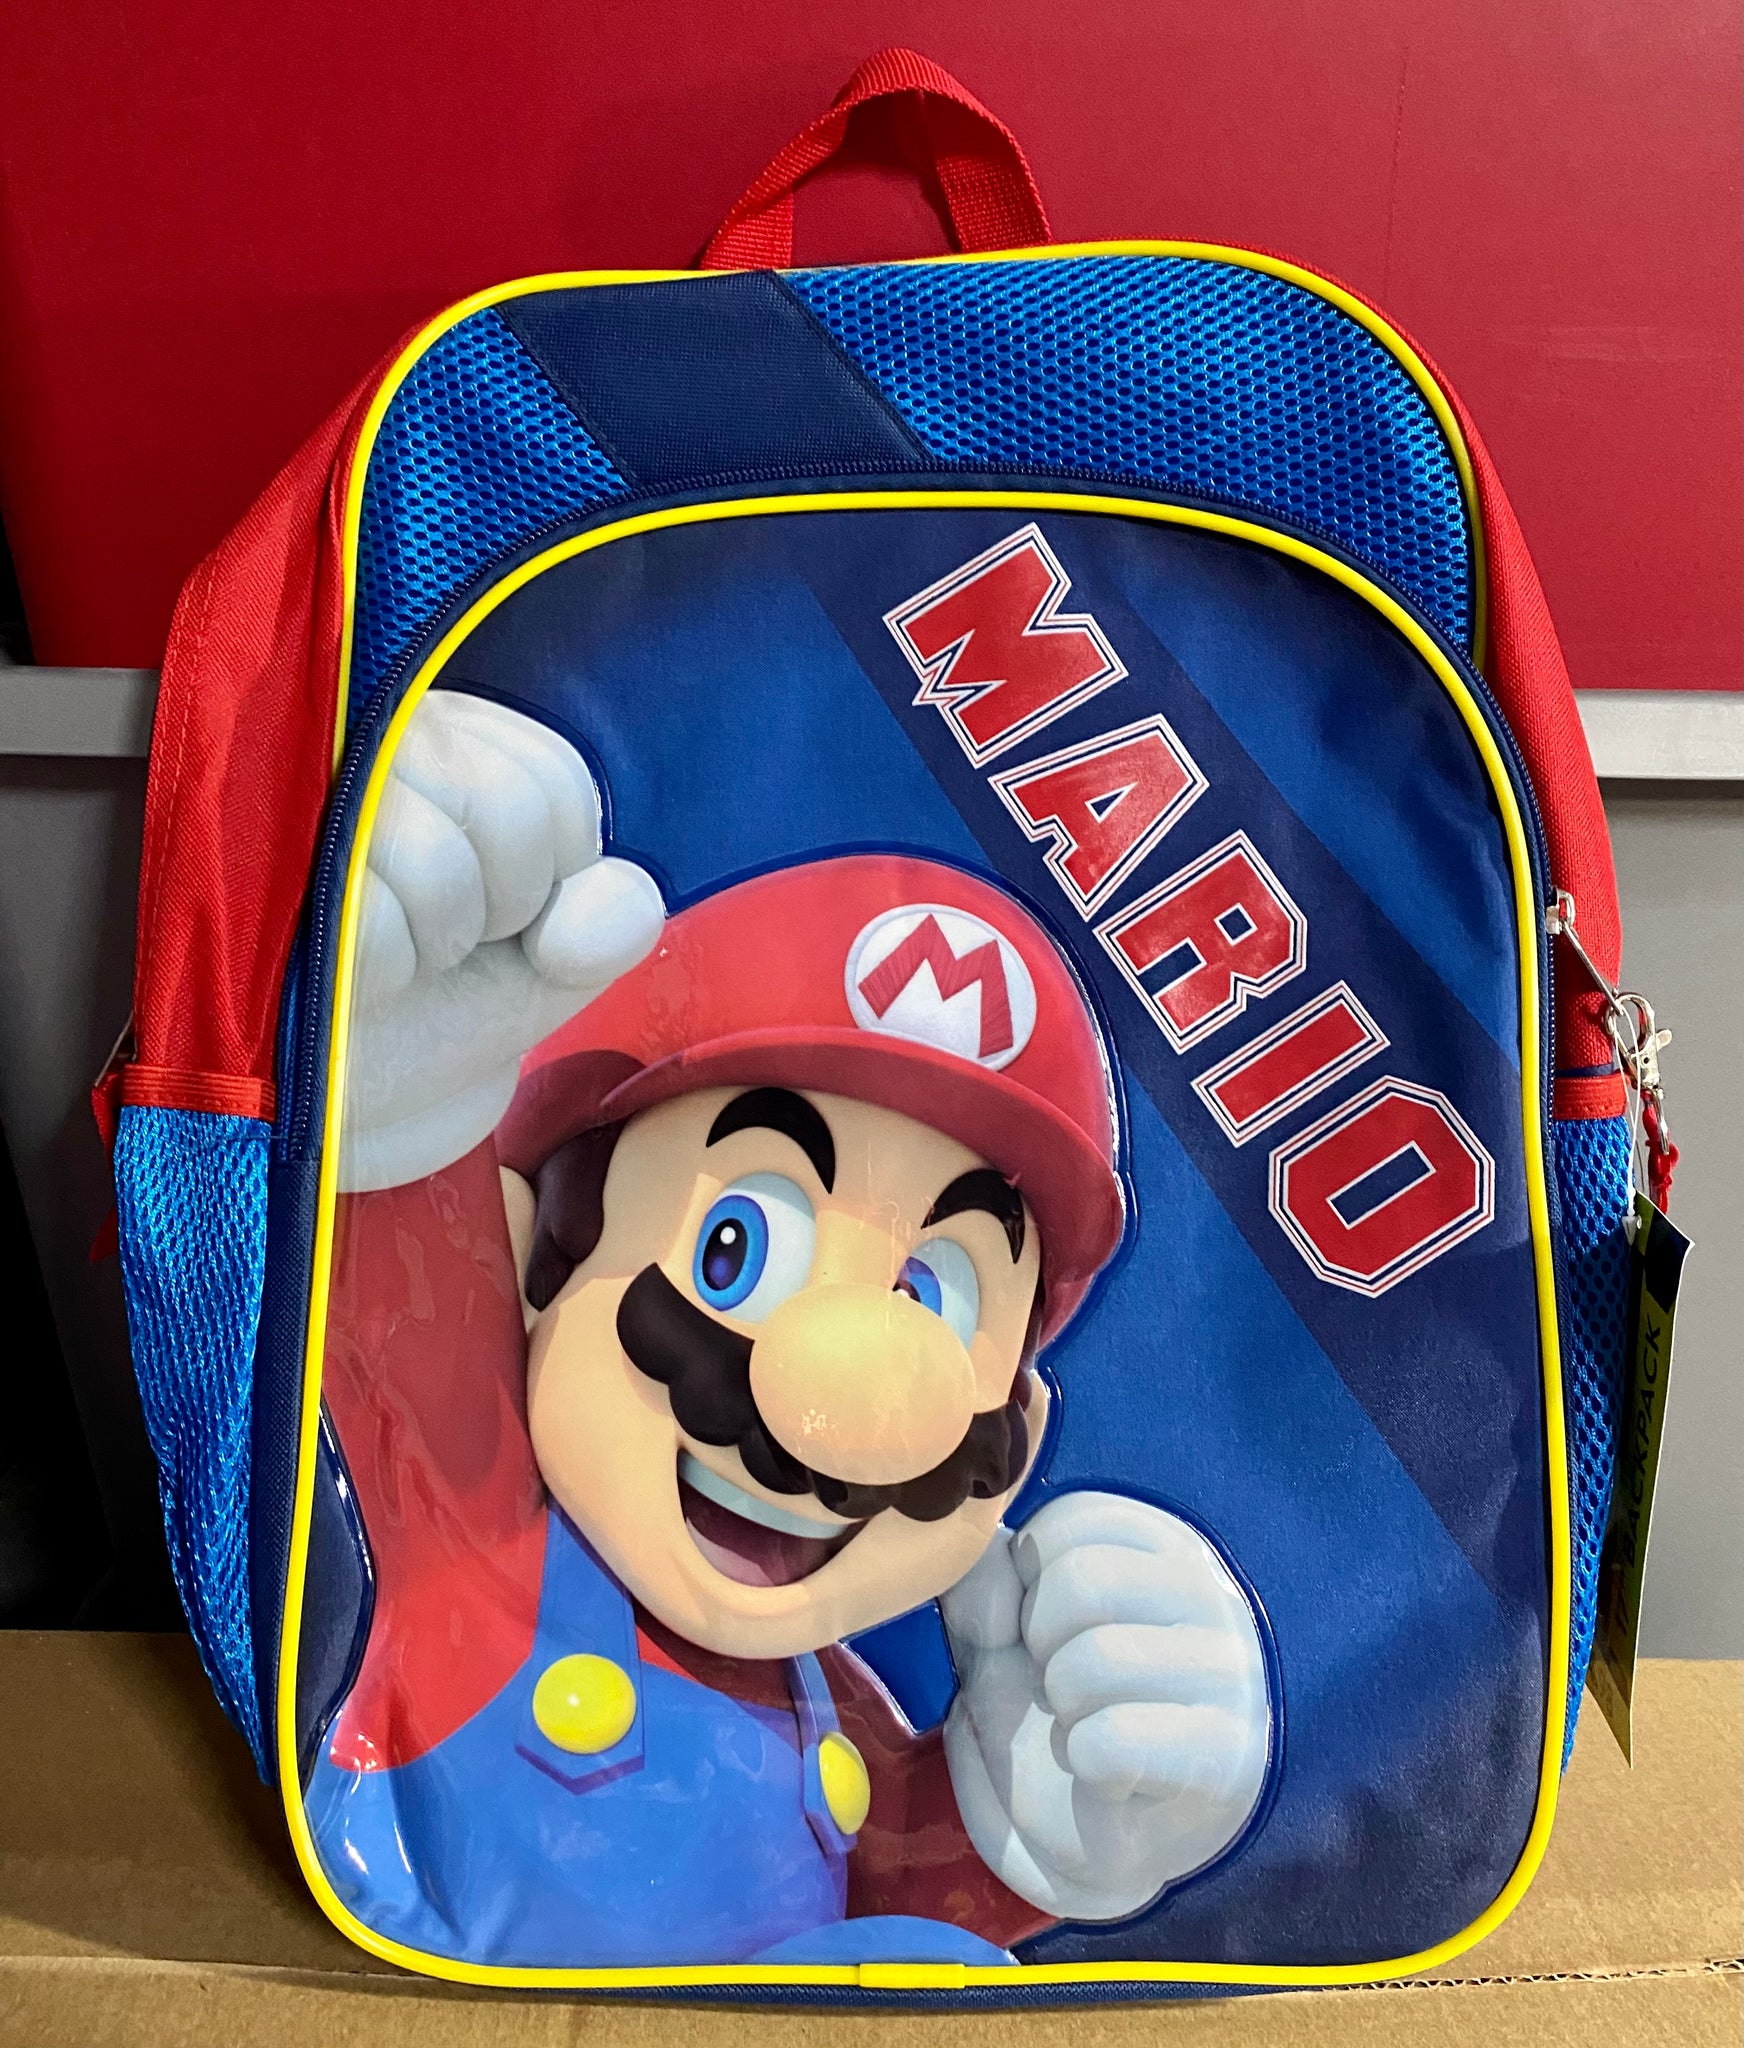 Mario Shop Super Mario Backpack With Lunch Box For